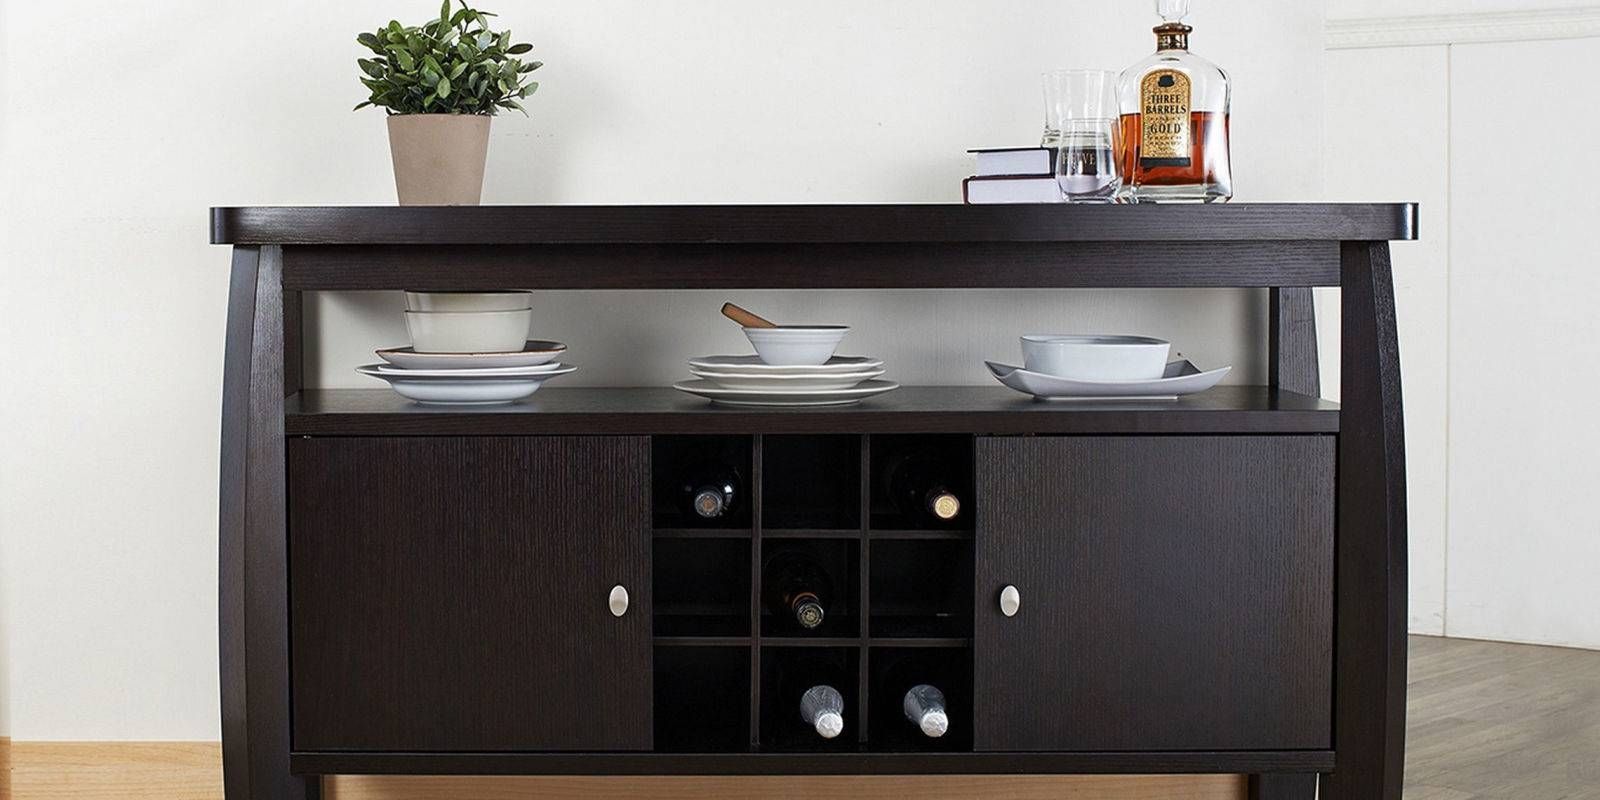 11 Best Sideboards And Buffets In 2018 – Reviews Of Sideboards Regarding Latest Espresso Sideboards (View 2 of 15)